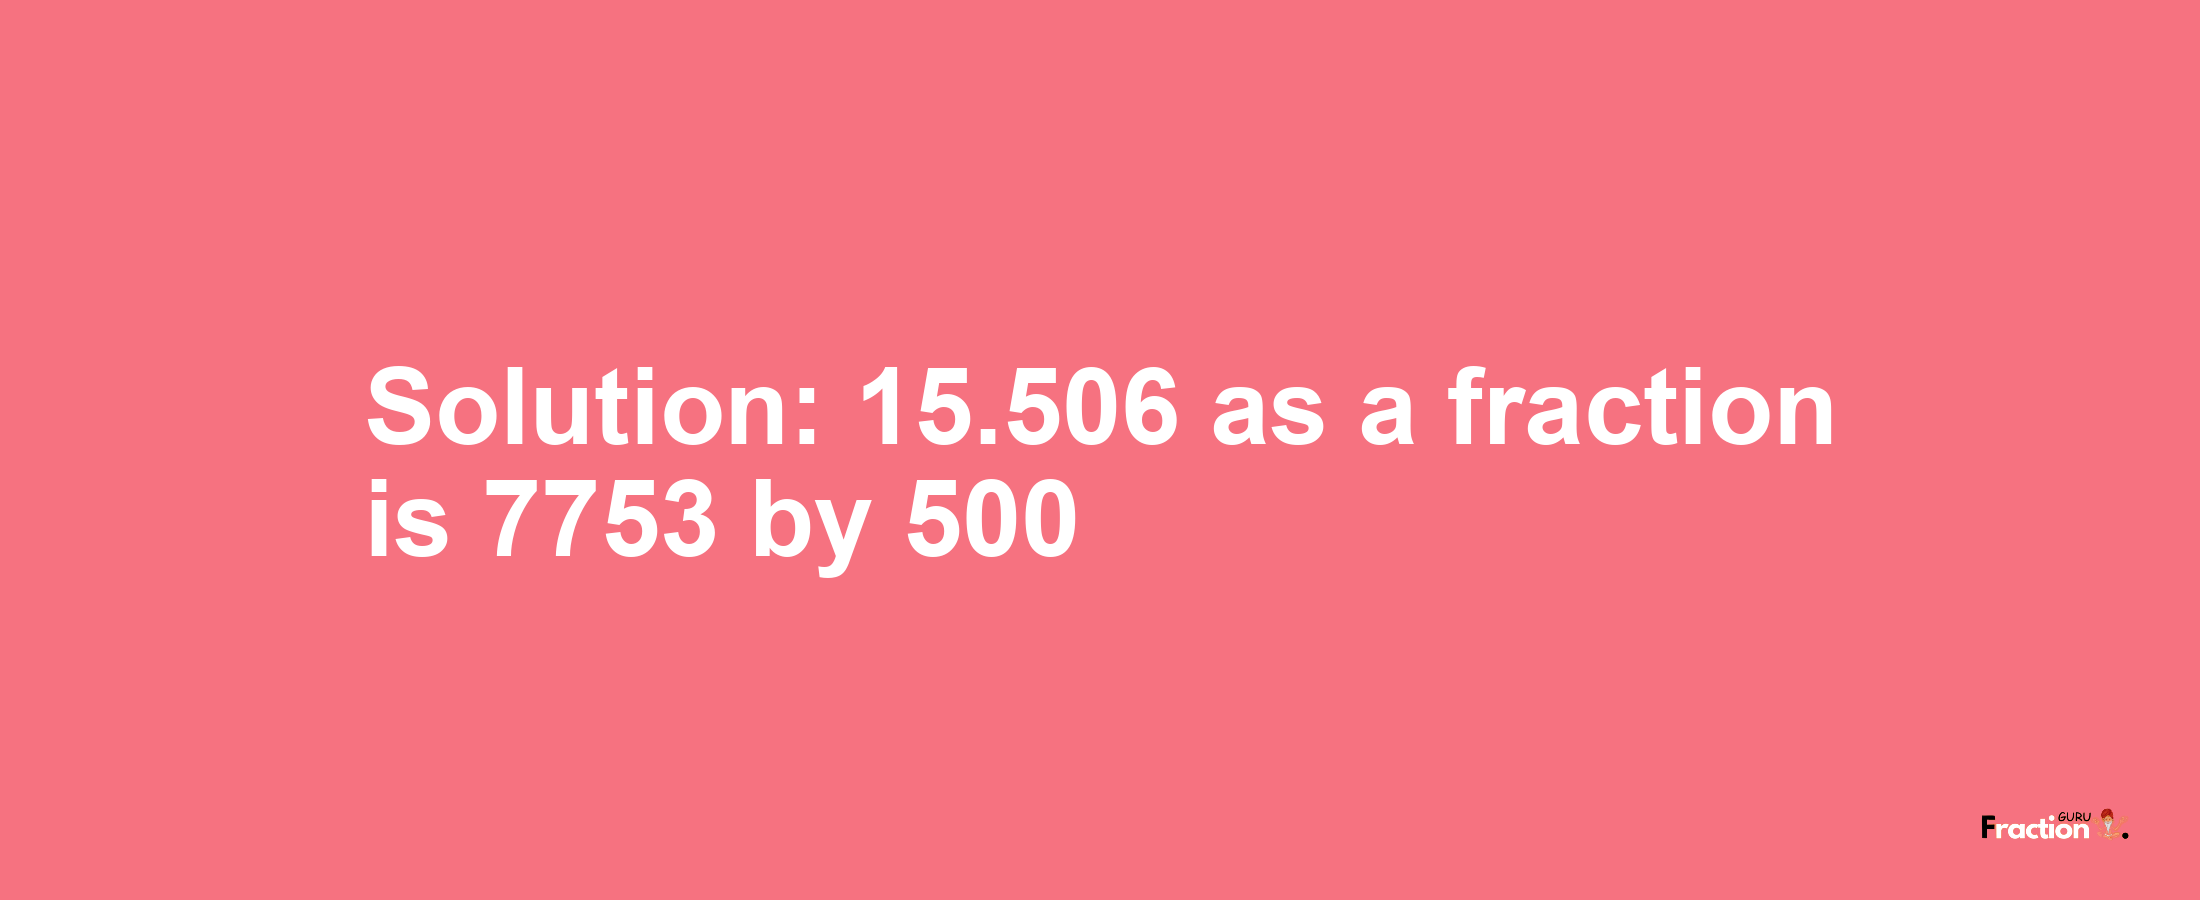 Solution:15.506 as a fraction is 7753/500